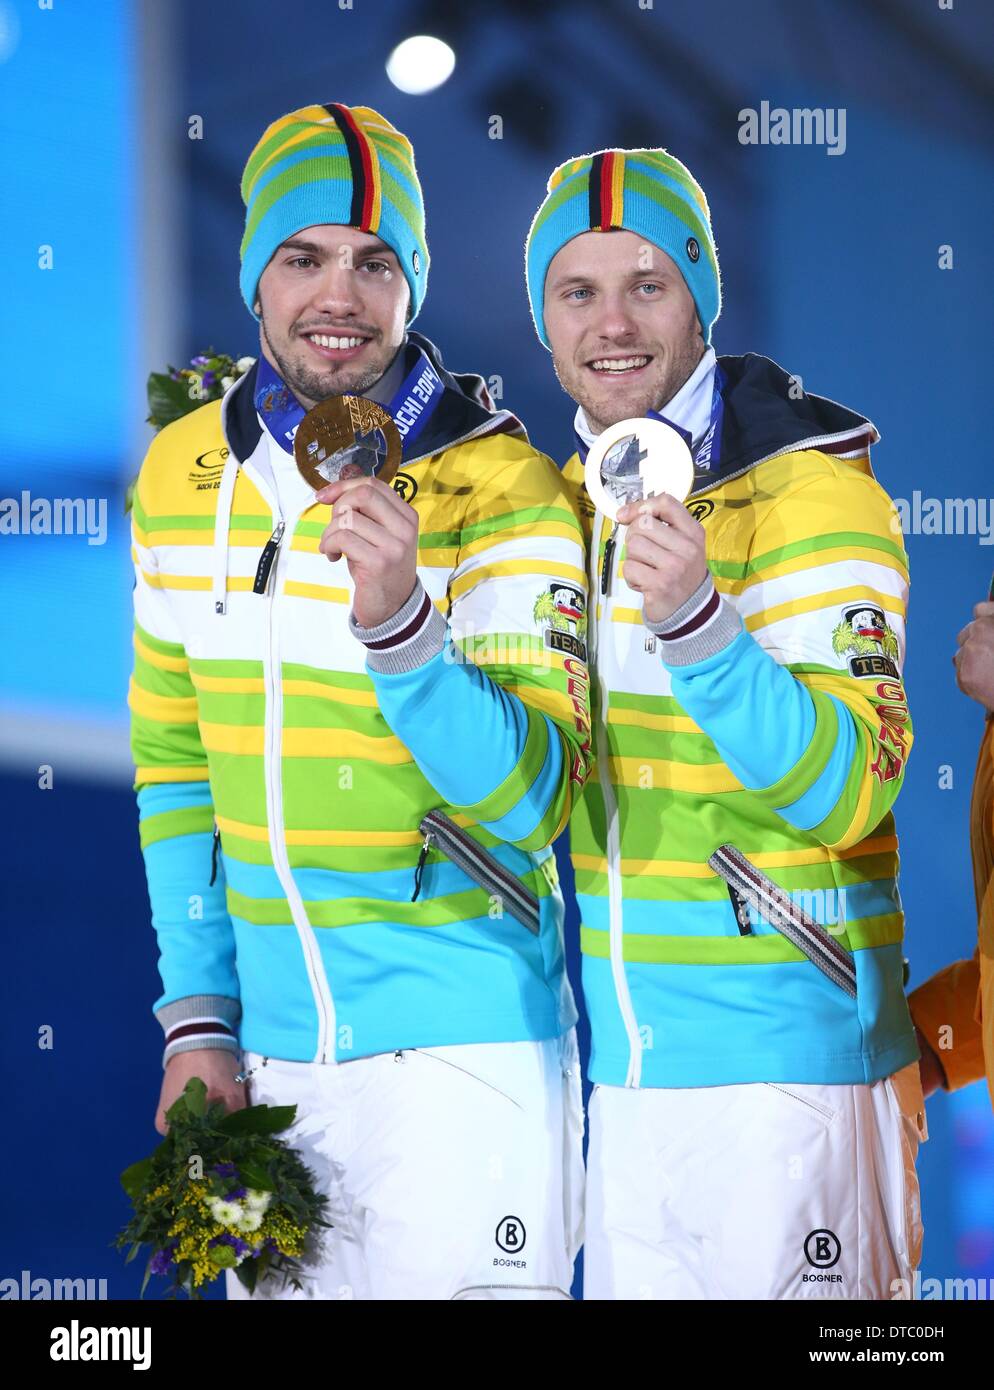 Gorki, Russia. 14th Feb, 2014. Gold Medalists Tobias Wendl (L) and Tobias Arlt of Germany pose with their medals on the podium during the medal ceremony for the Men's Luge Doubles Competition at the Sochi 2014 Olympic Games, Sochi, Russia, 14 February 2014. Photo: Christian Charisius/dpa Credit:  dpa picture alliance/Alamy Live News Stock Photo